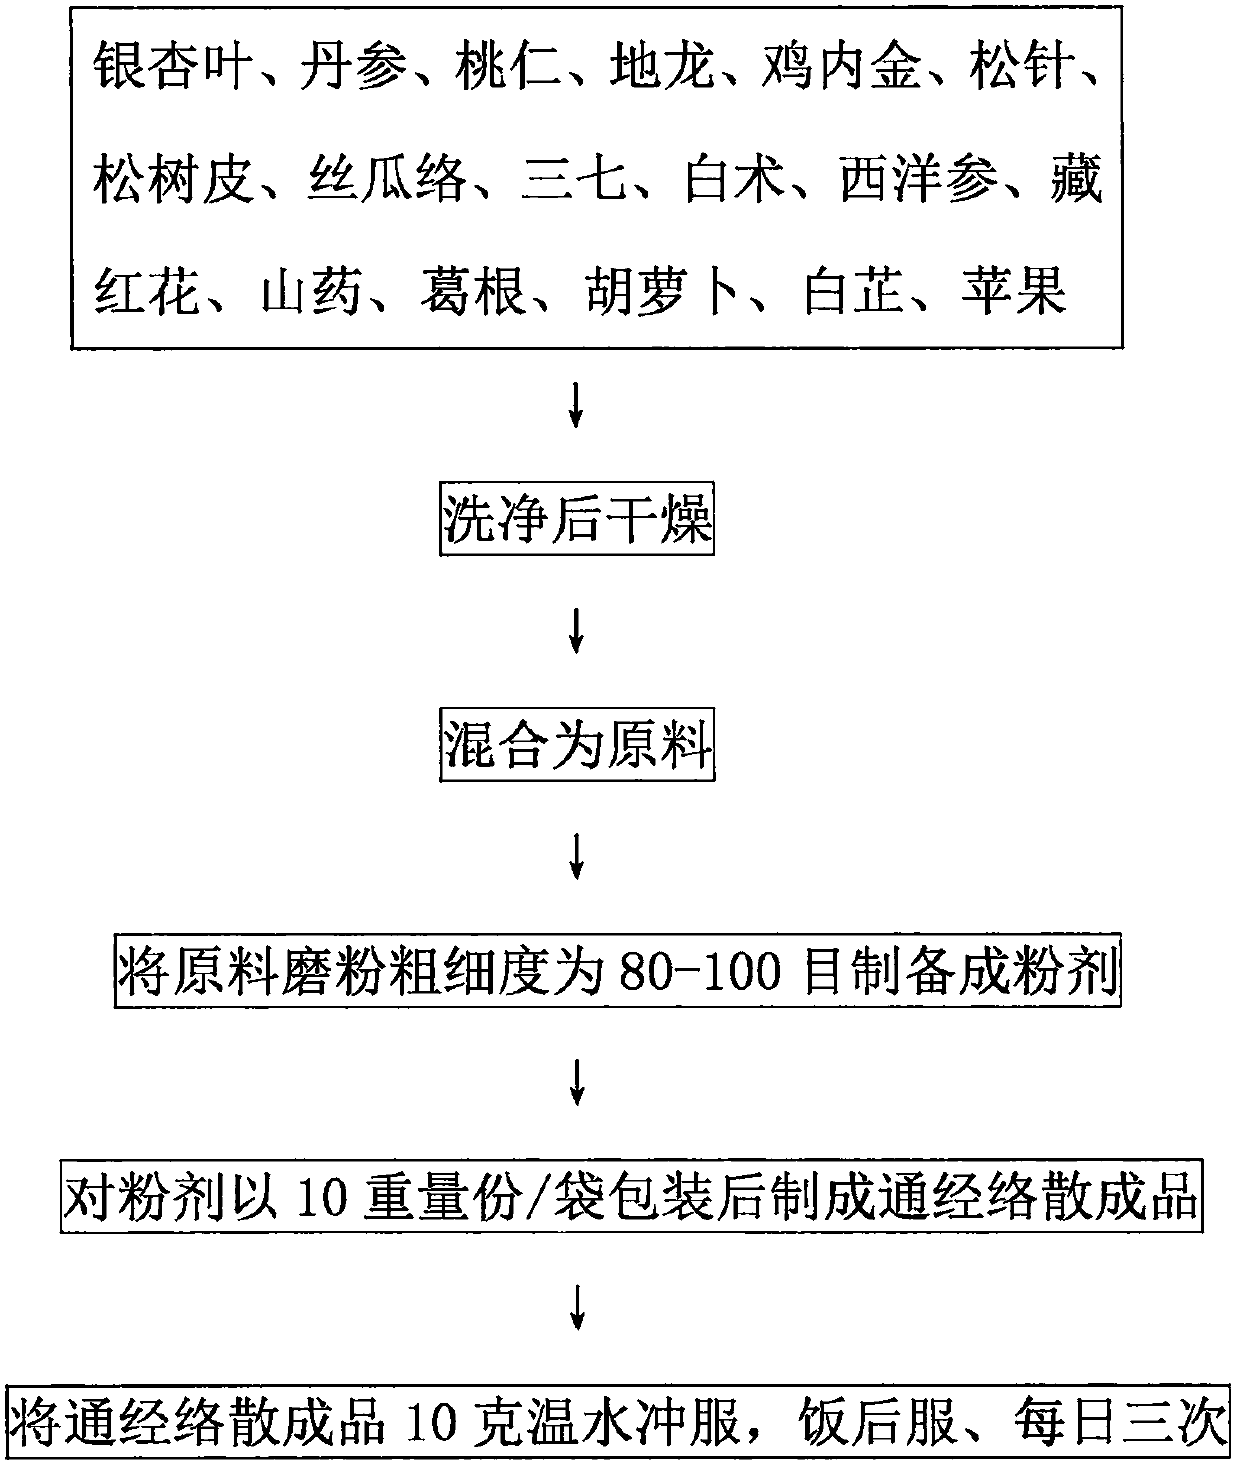 Preparation method of powder for dredging channels and collaterals